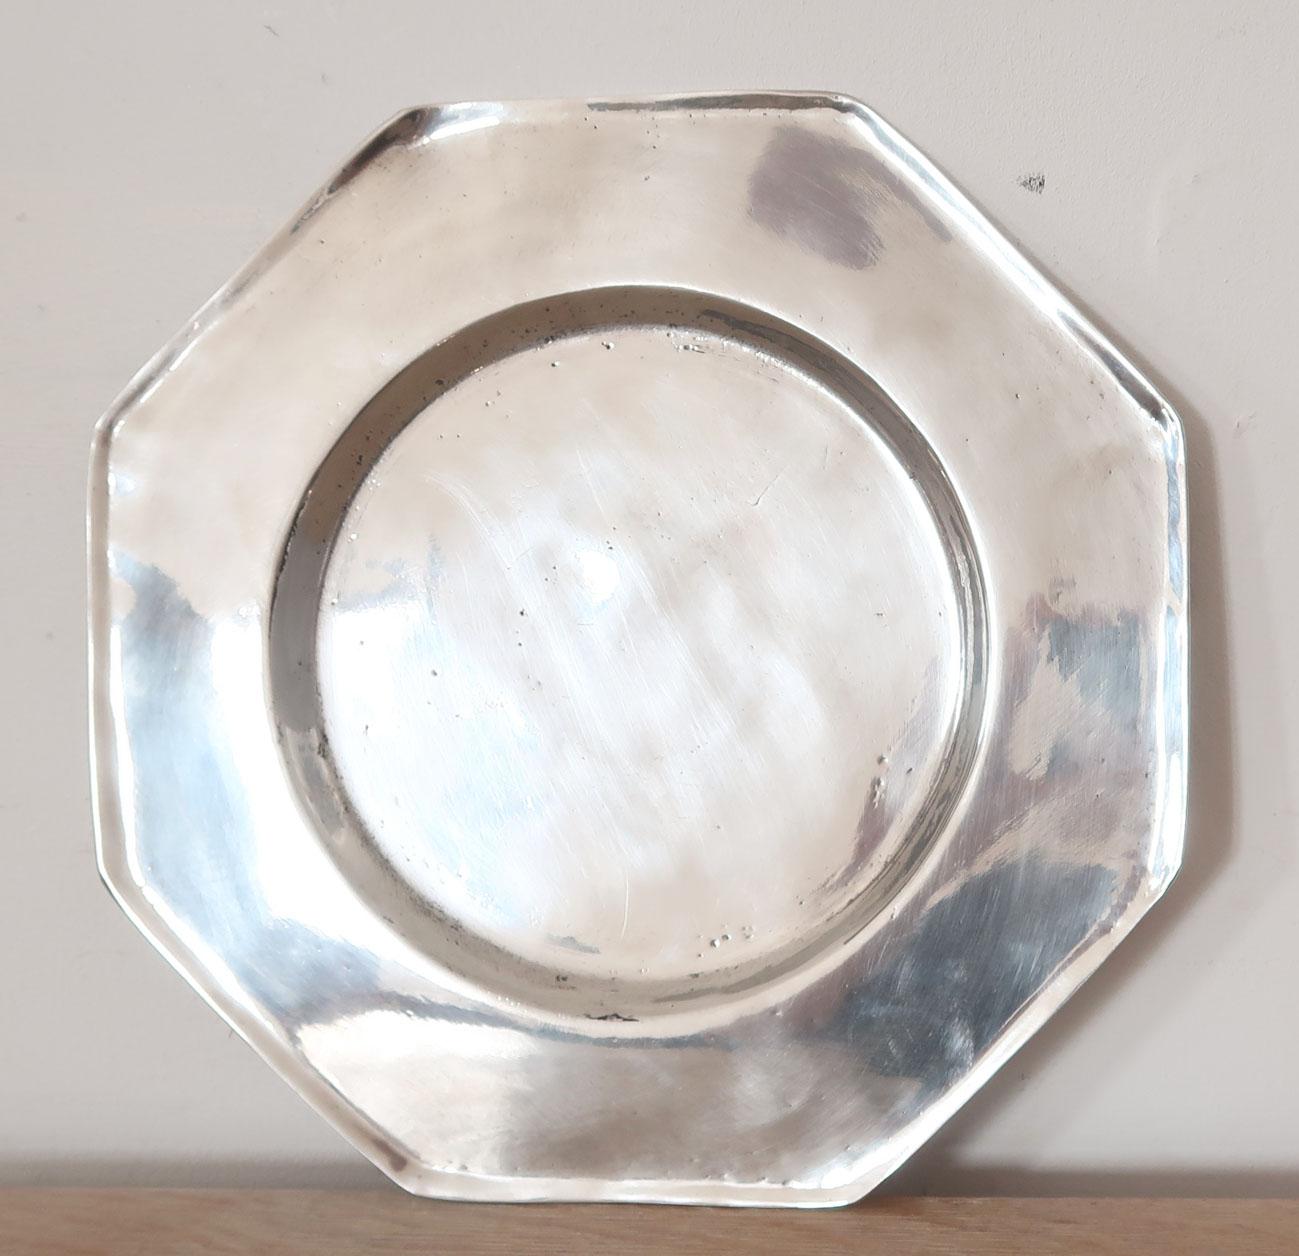 Swedish Antique Brightly Polished Pewter Octagonal Plate, 19th Century